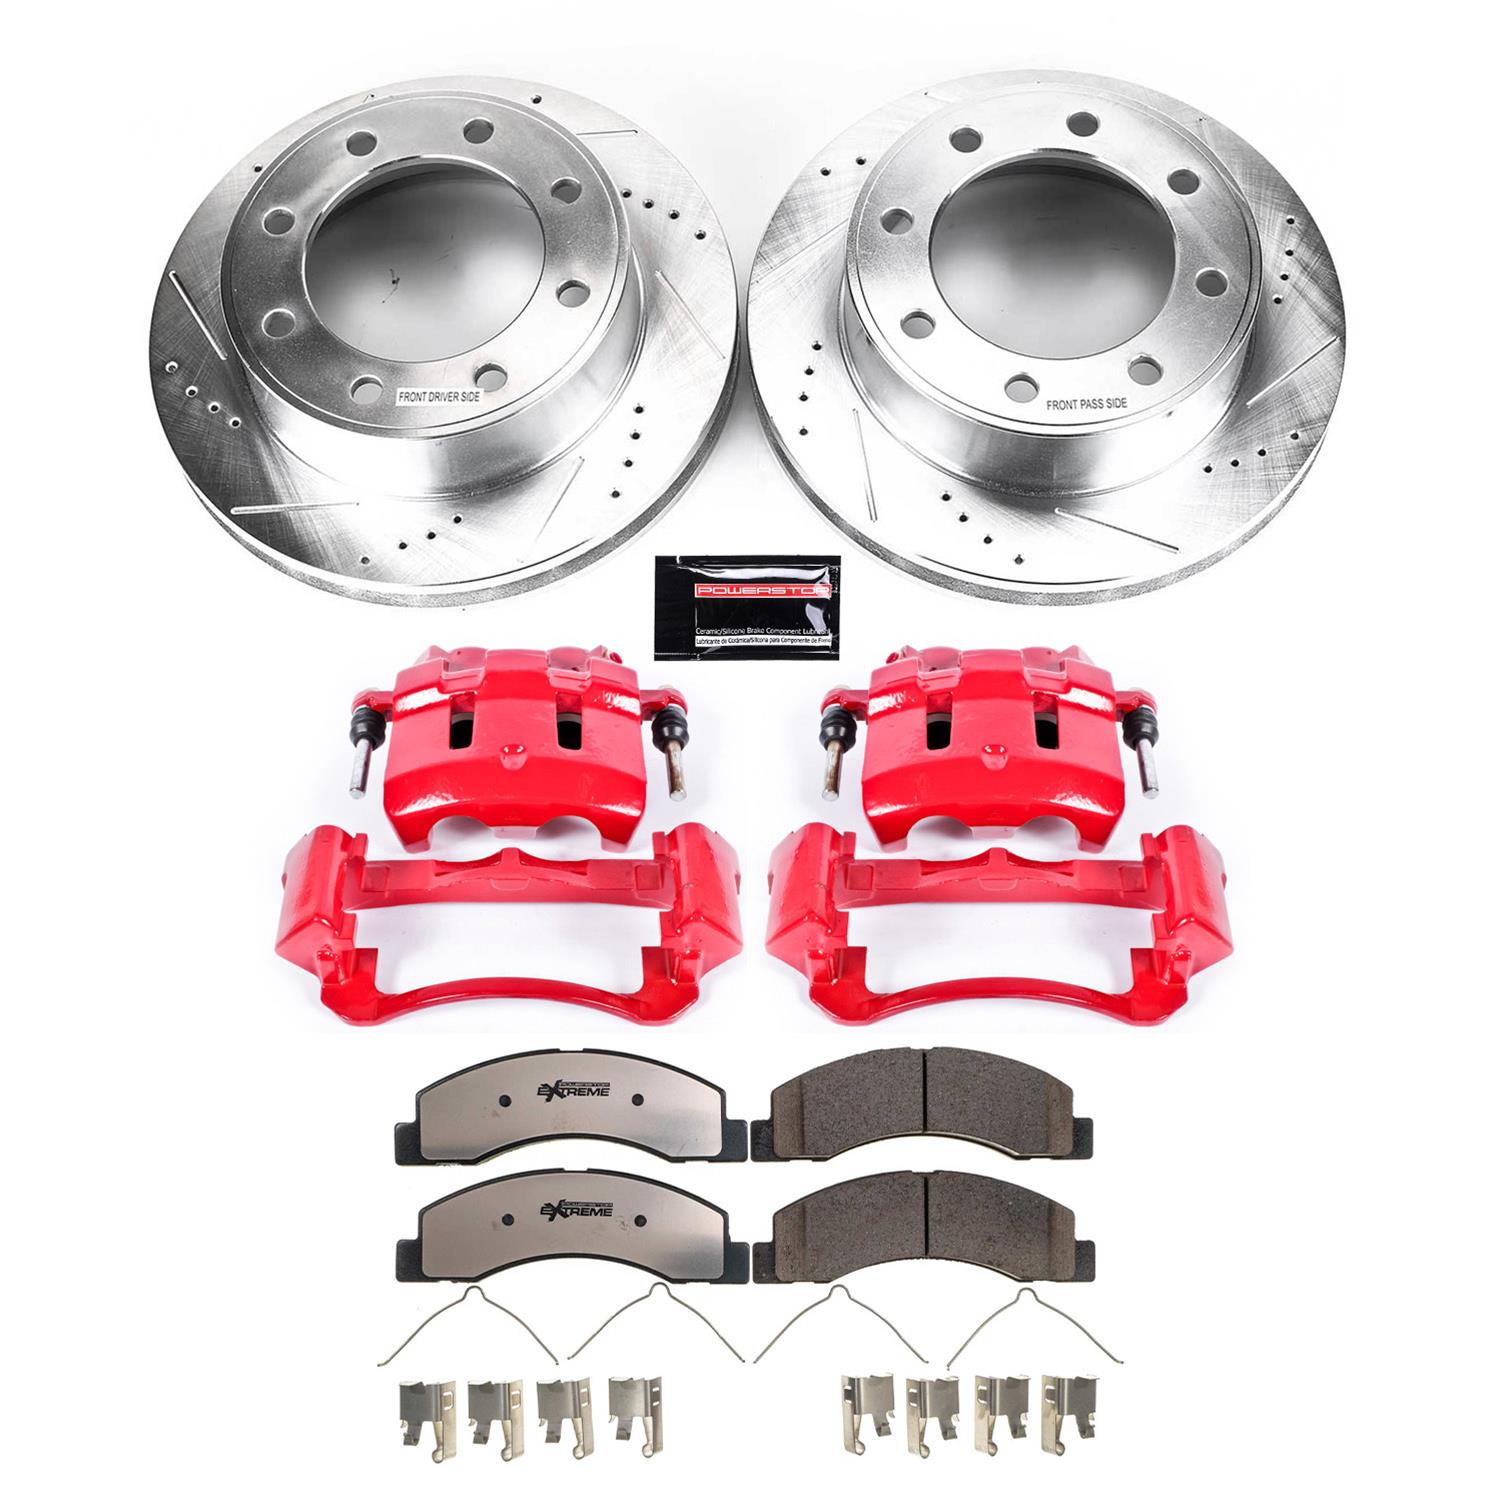 Power Stop KC1905-36 Power Stop Z36 Truck and Tow Brake Upgrade Kits with  Calipers | Summit Racing